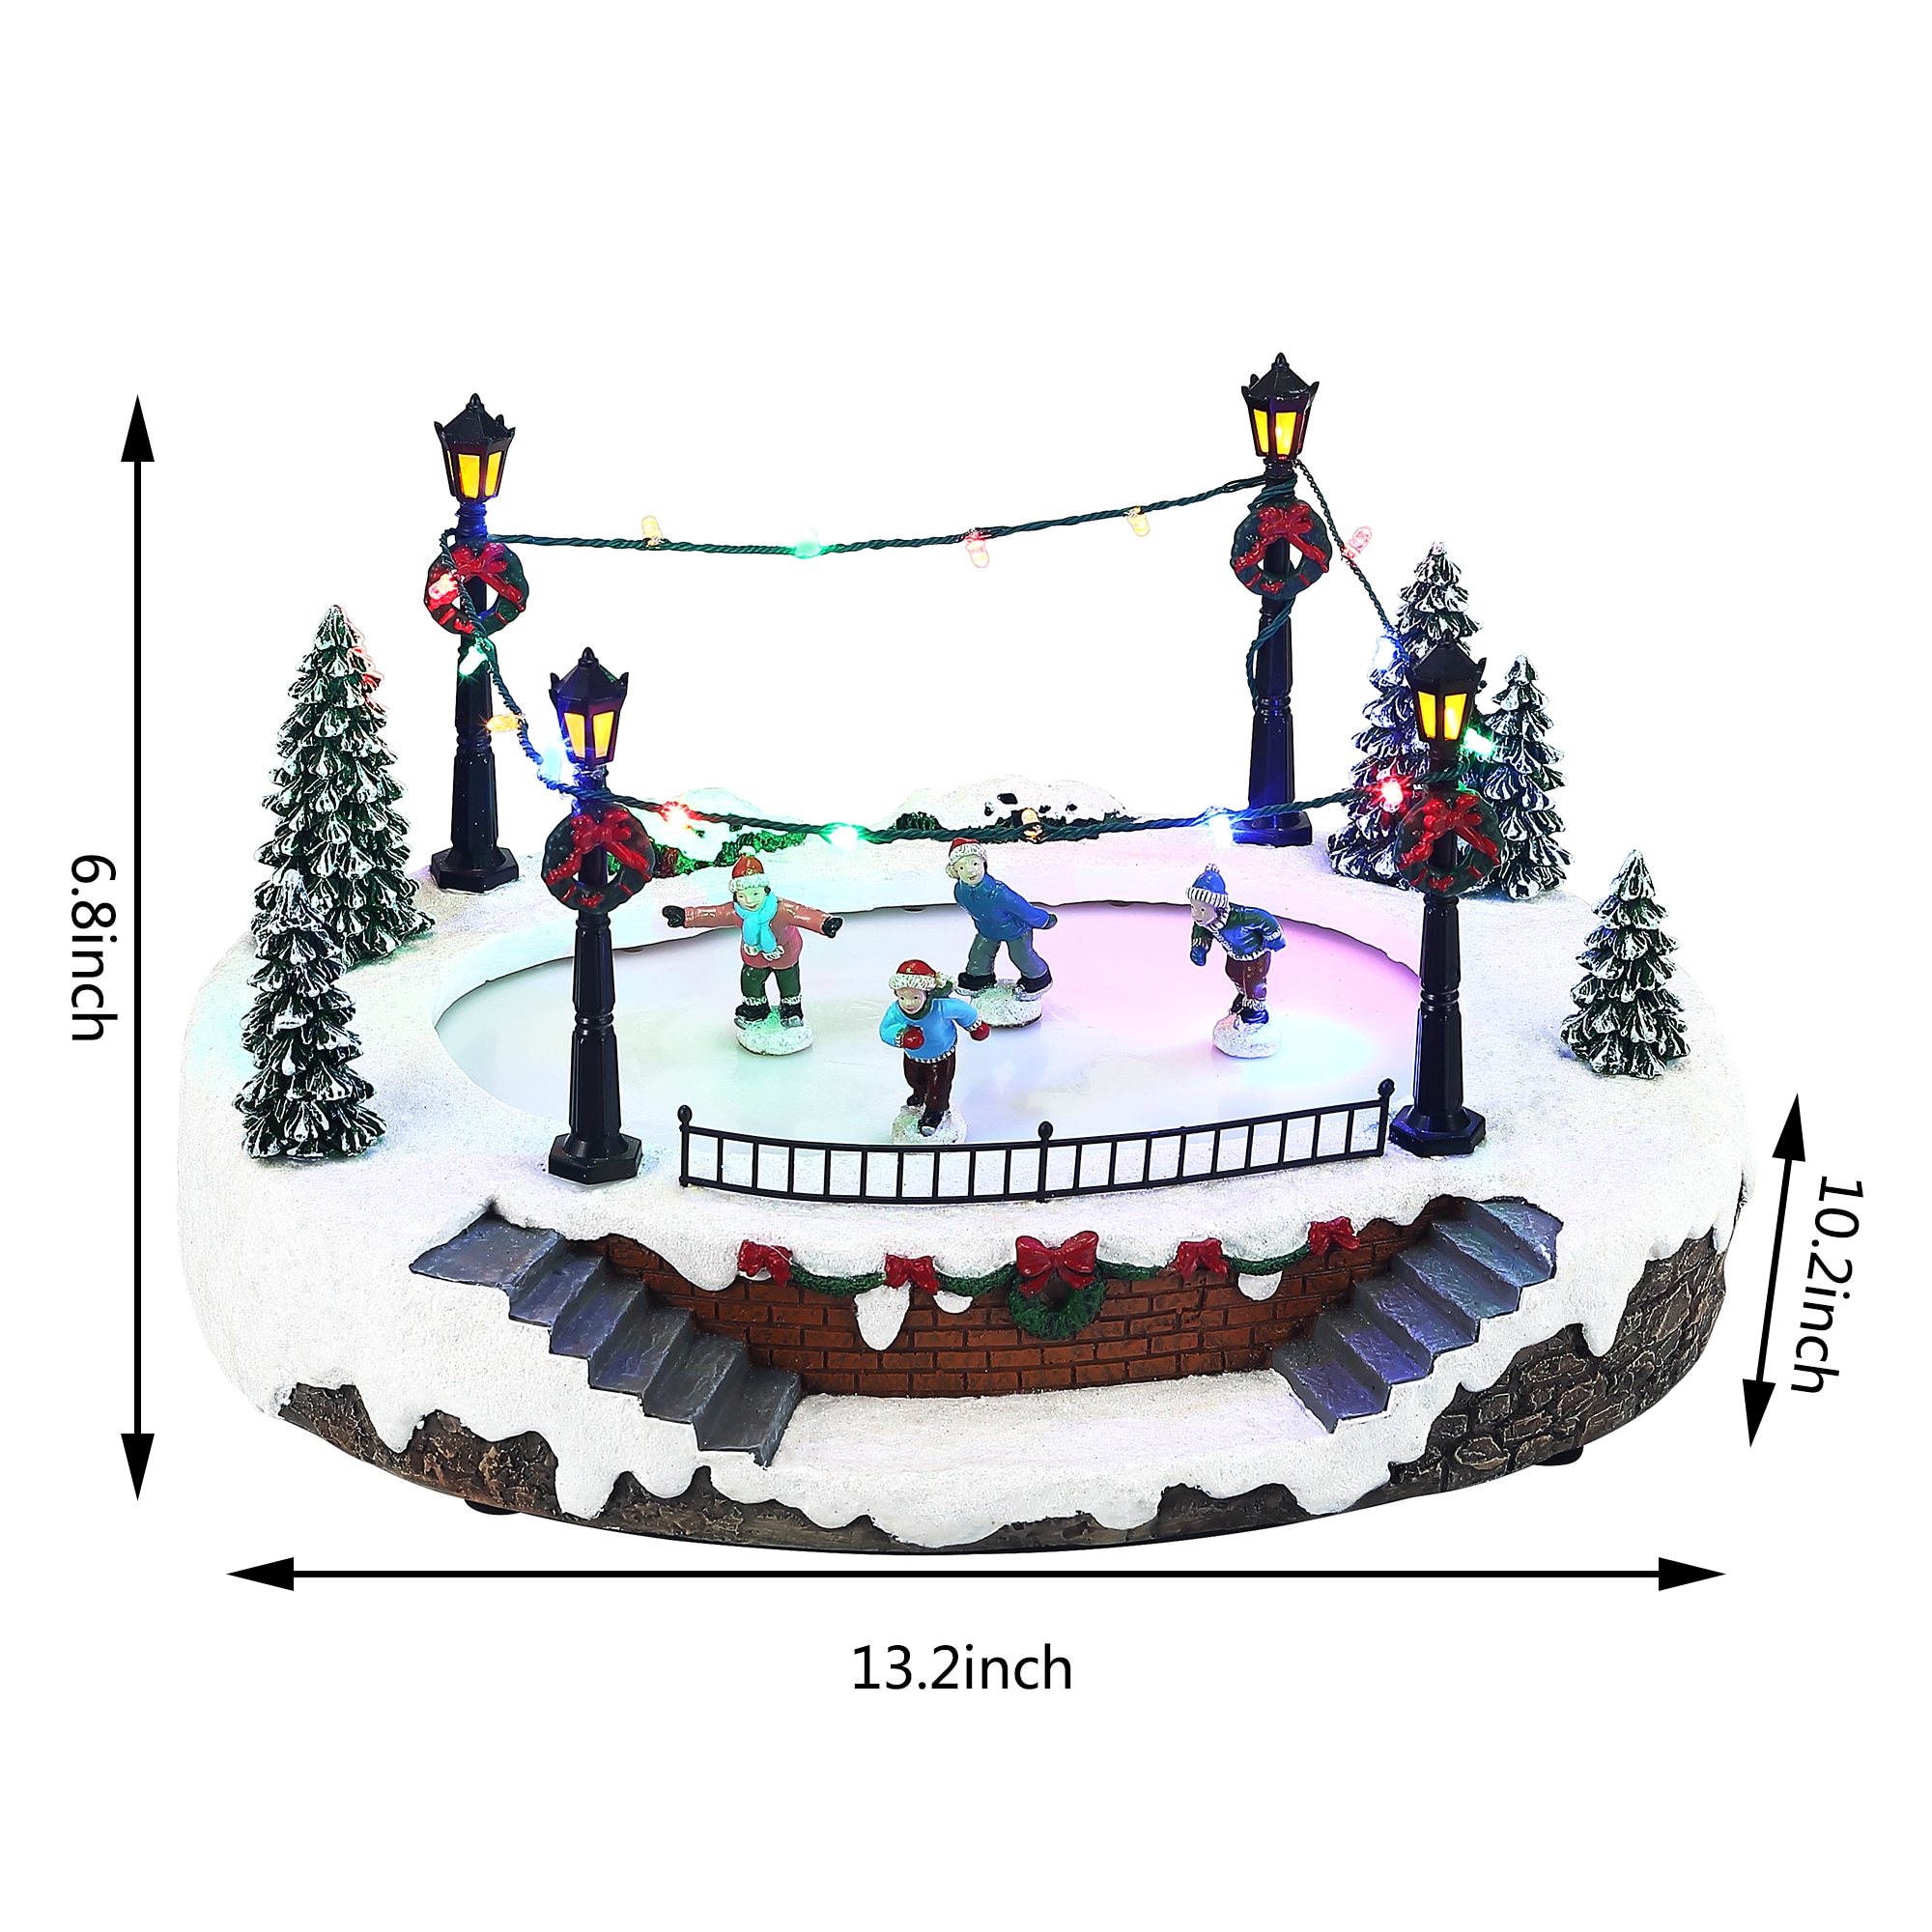 Winter Wonder Removable Plate Two Pack